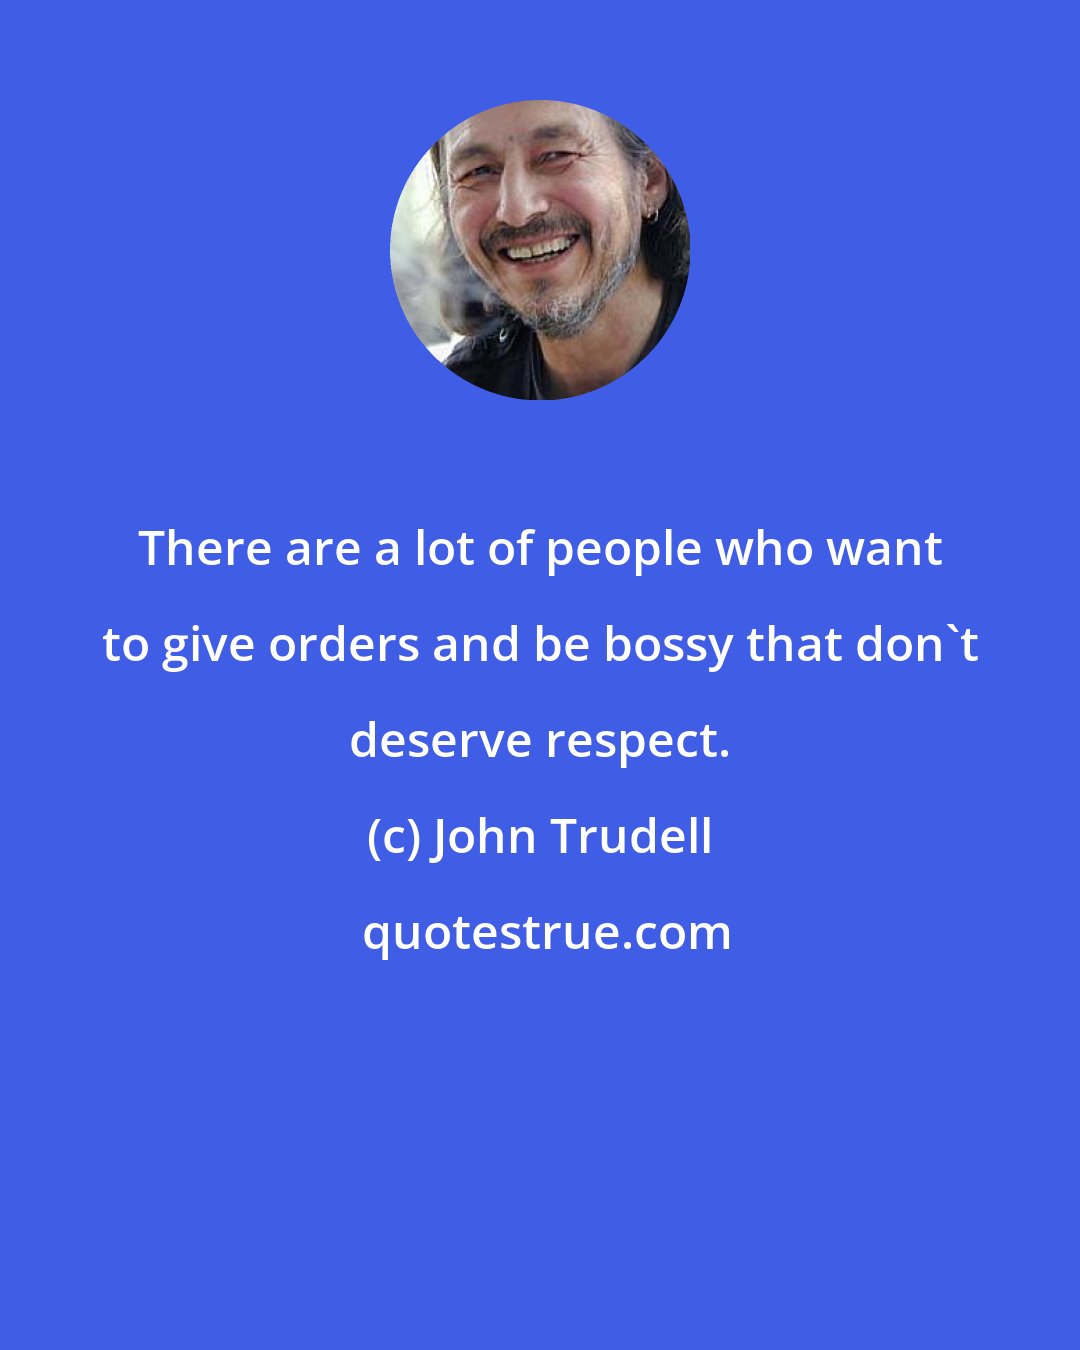 John Trudell: There are a lot of people who want to give orders and be bossy that don't deserve respect.